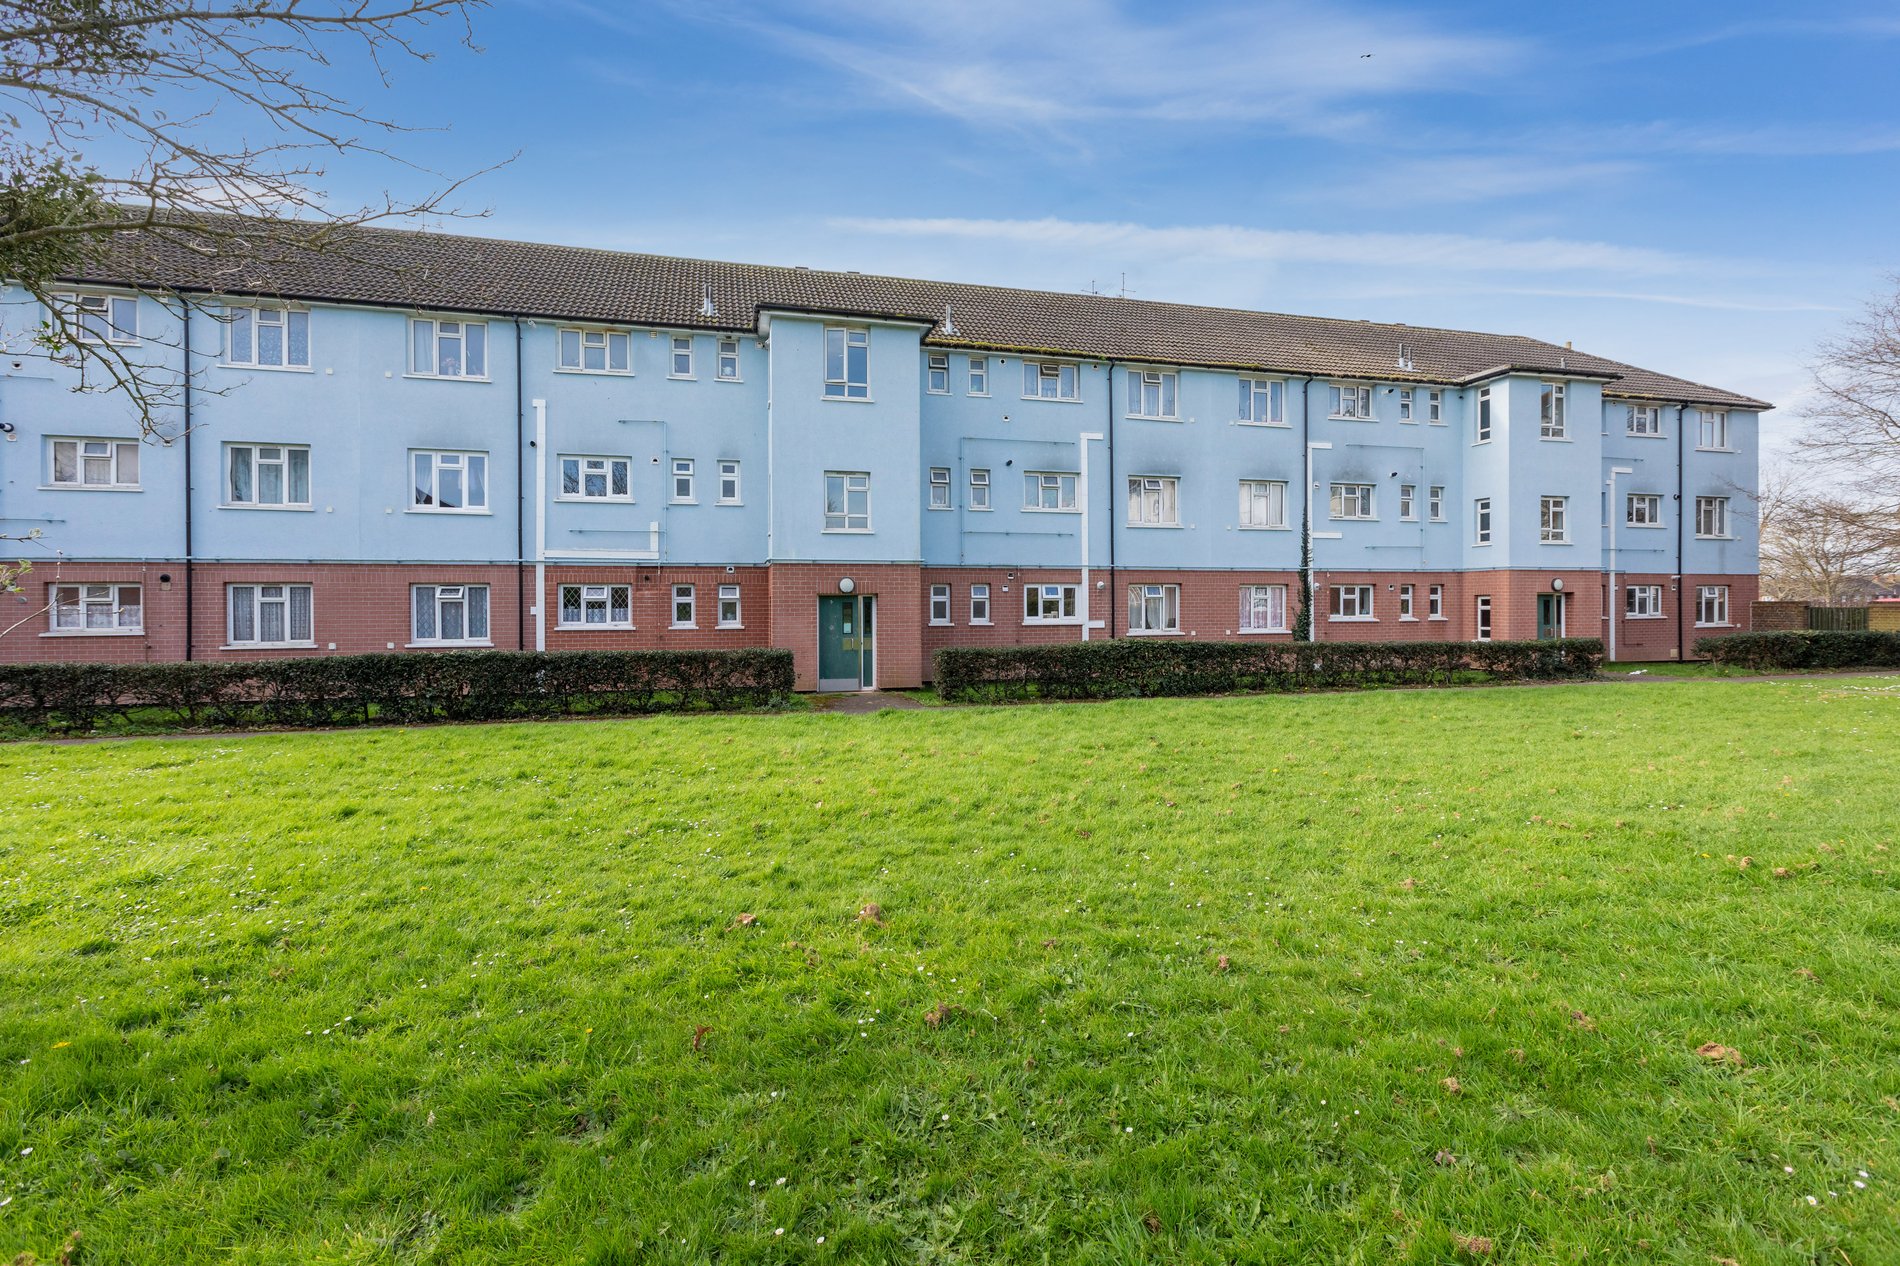 3 bed flat for sale in Reddington Drive, Langley - Property Image 1